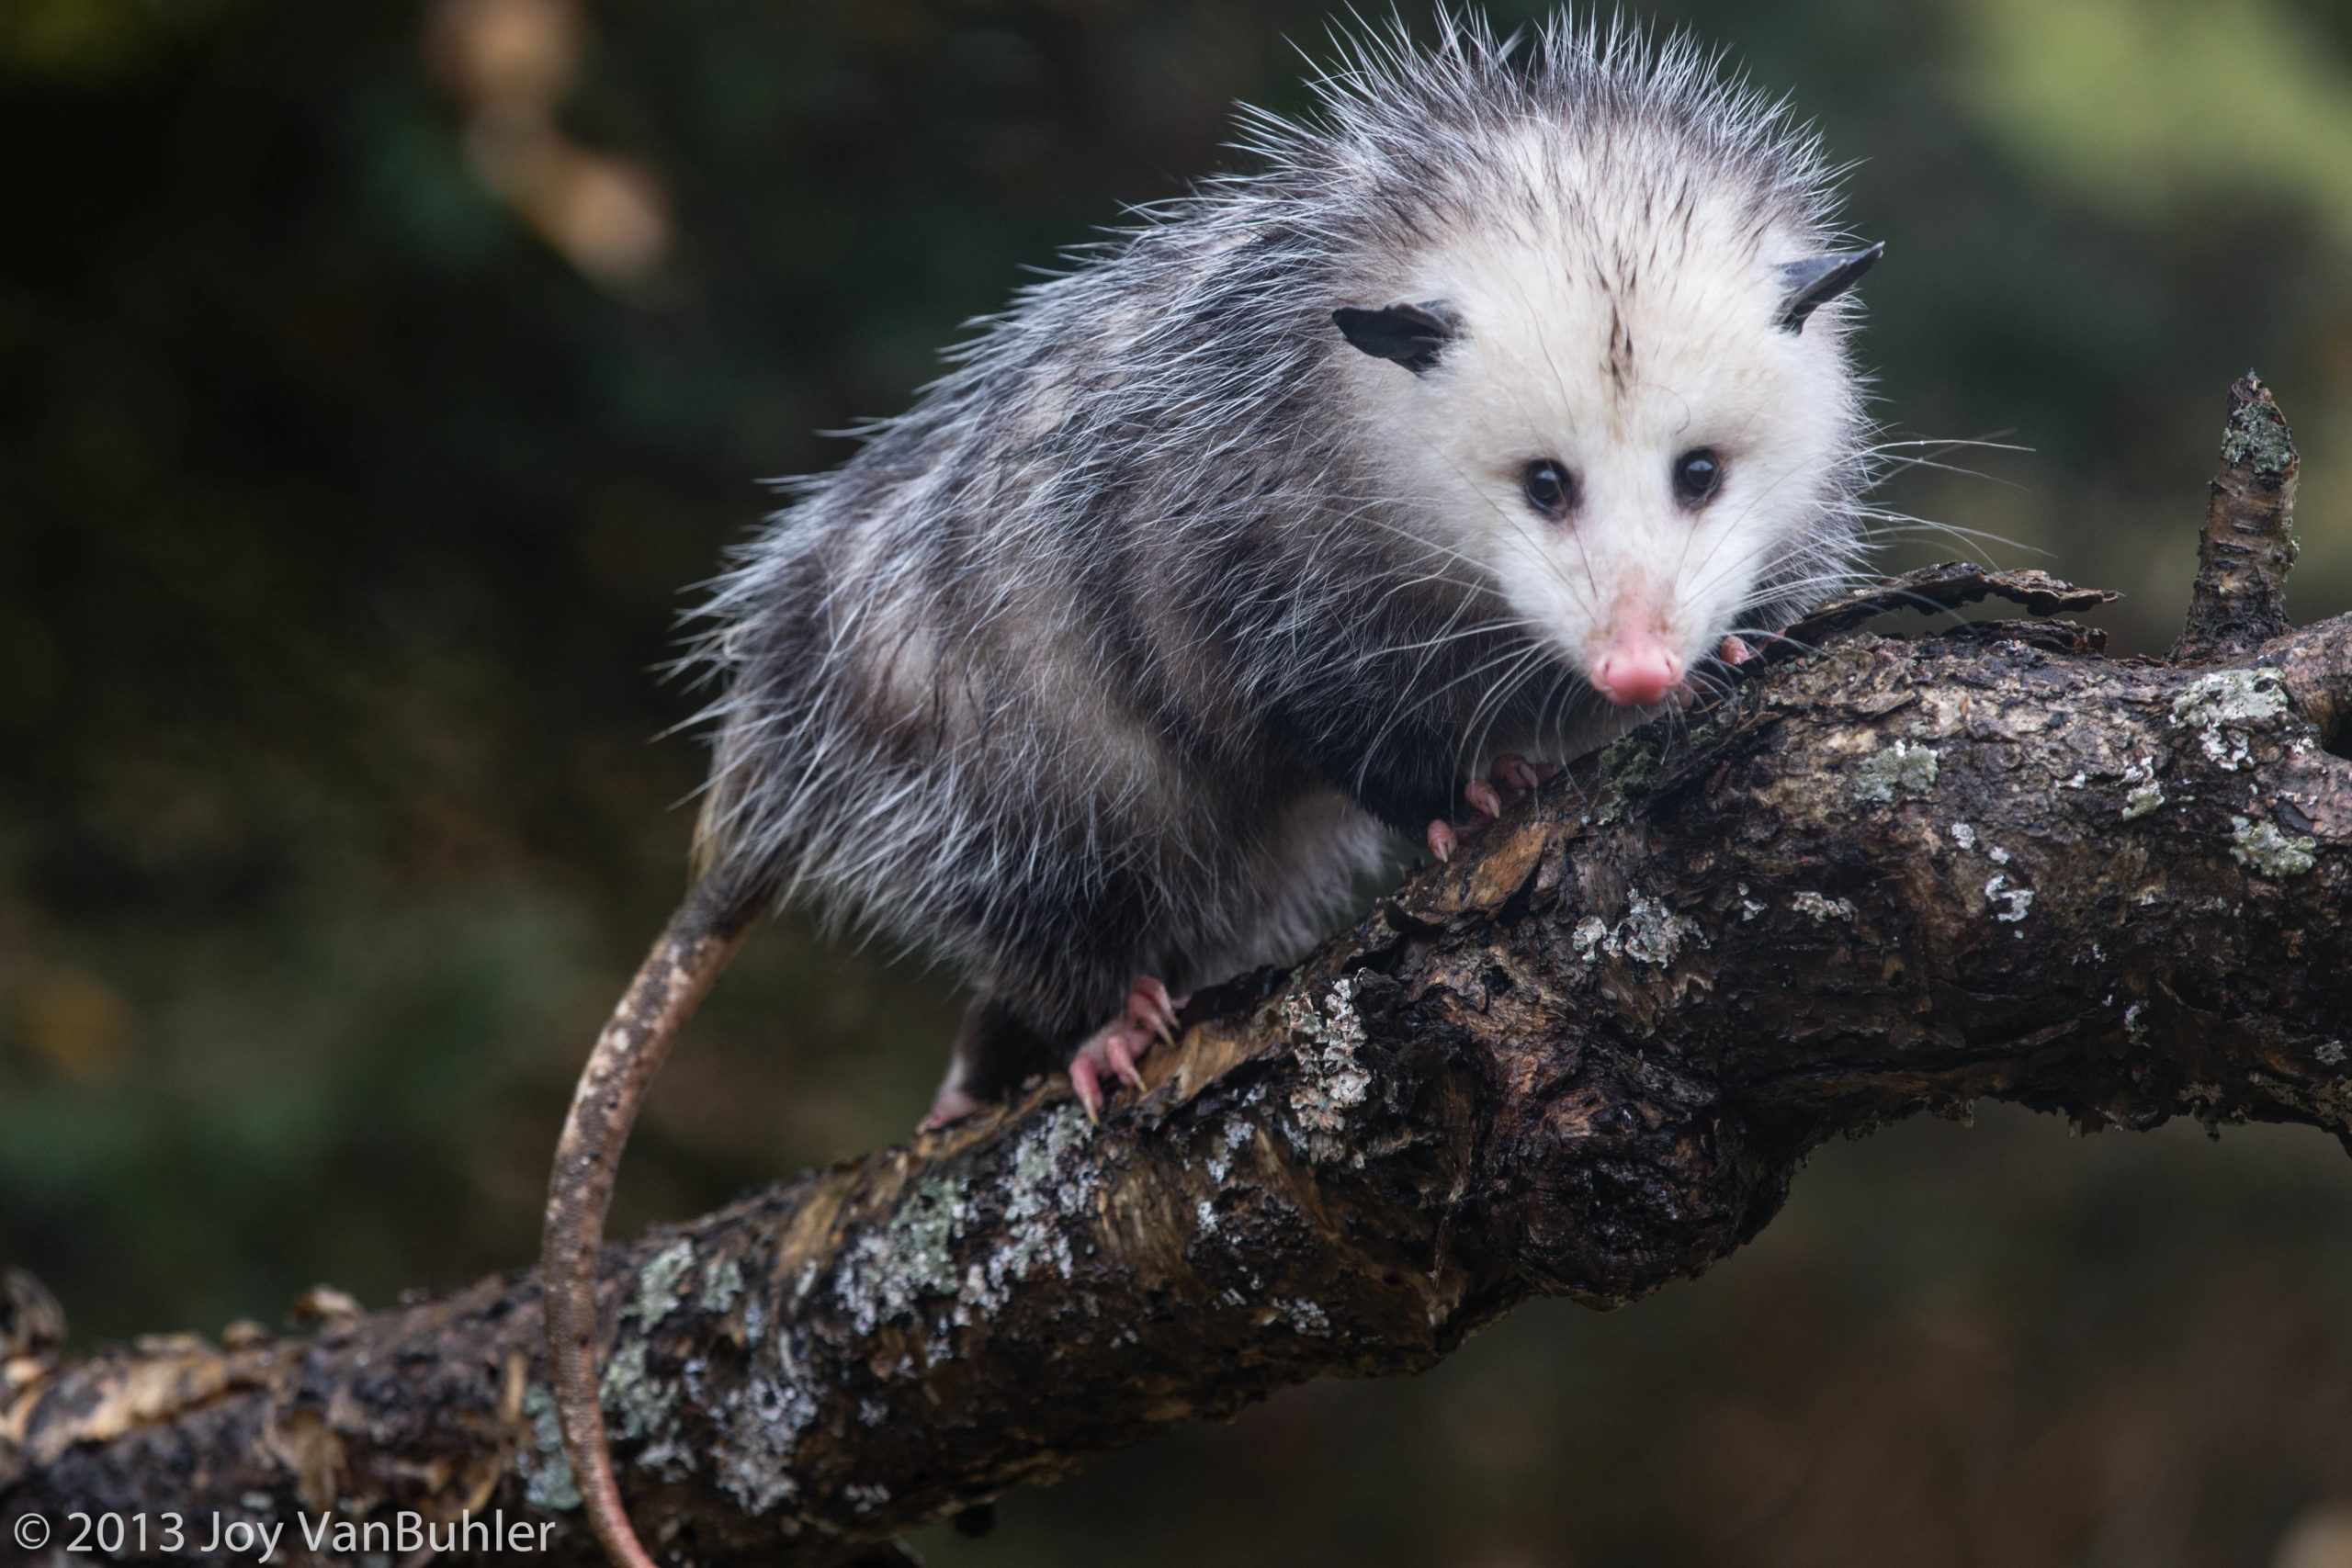 Strange and Surprising Facts about Opossums